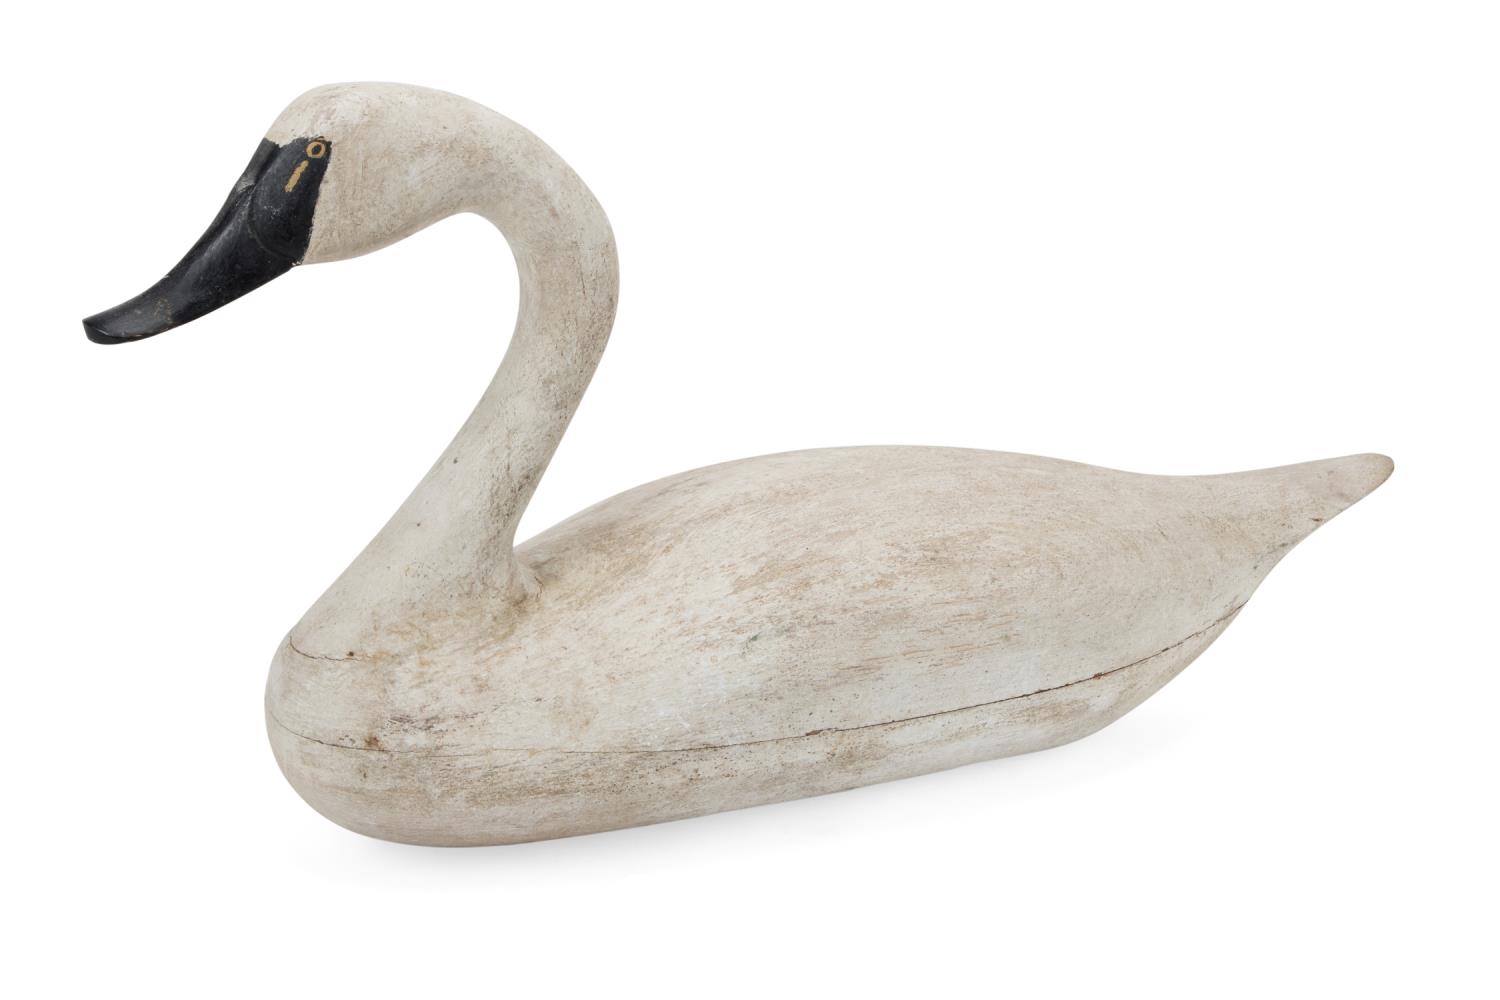 LIFE SIZE TRUMPETER SWAN WOODEN